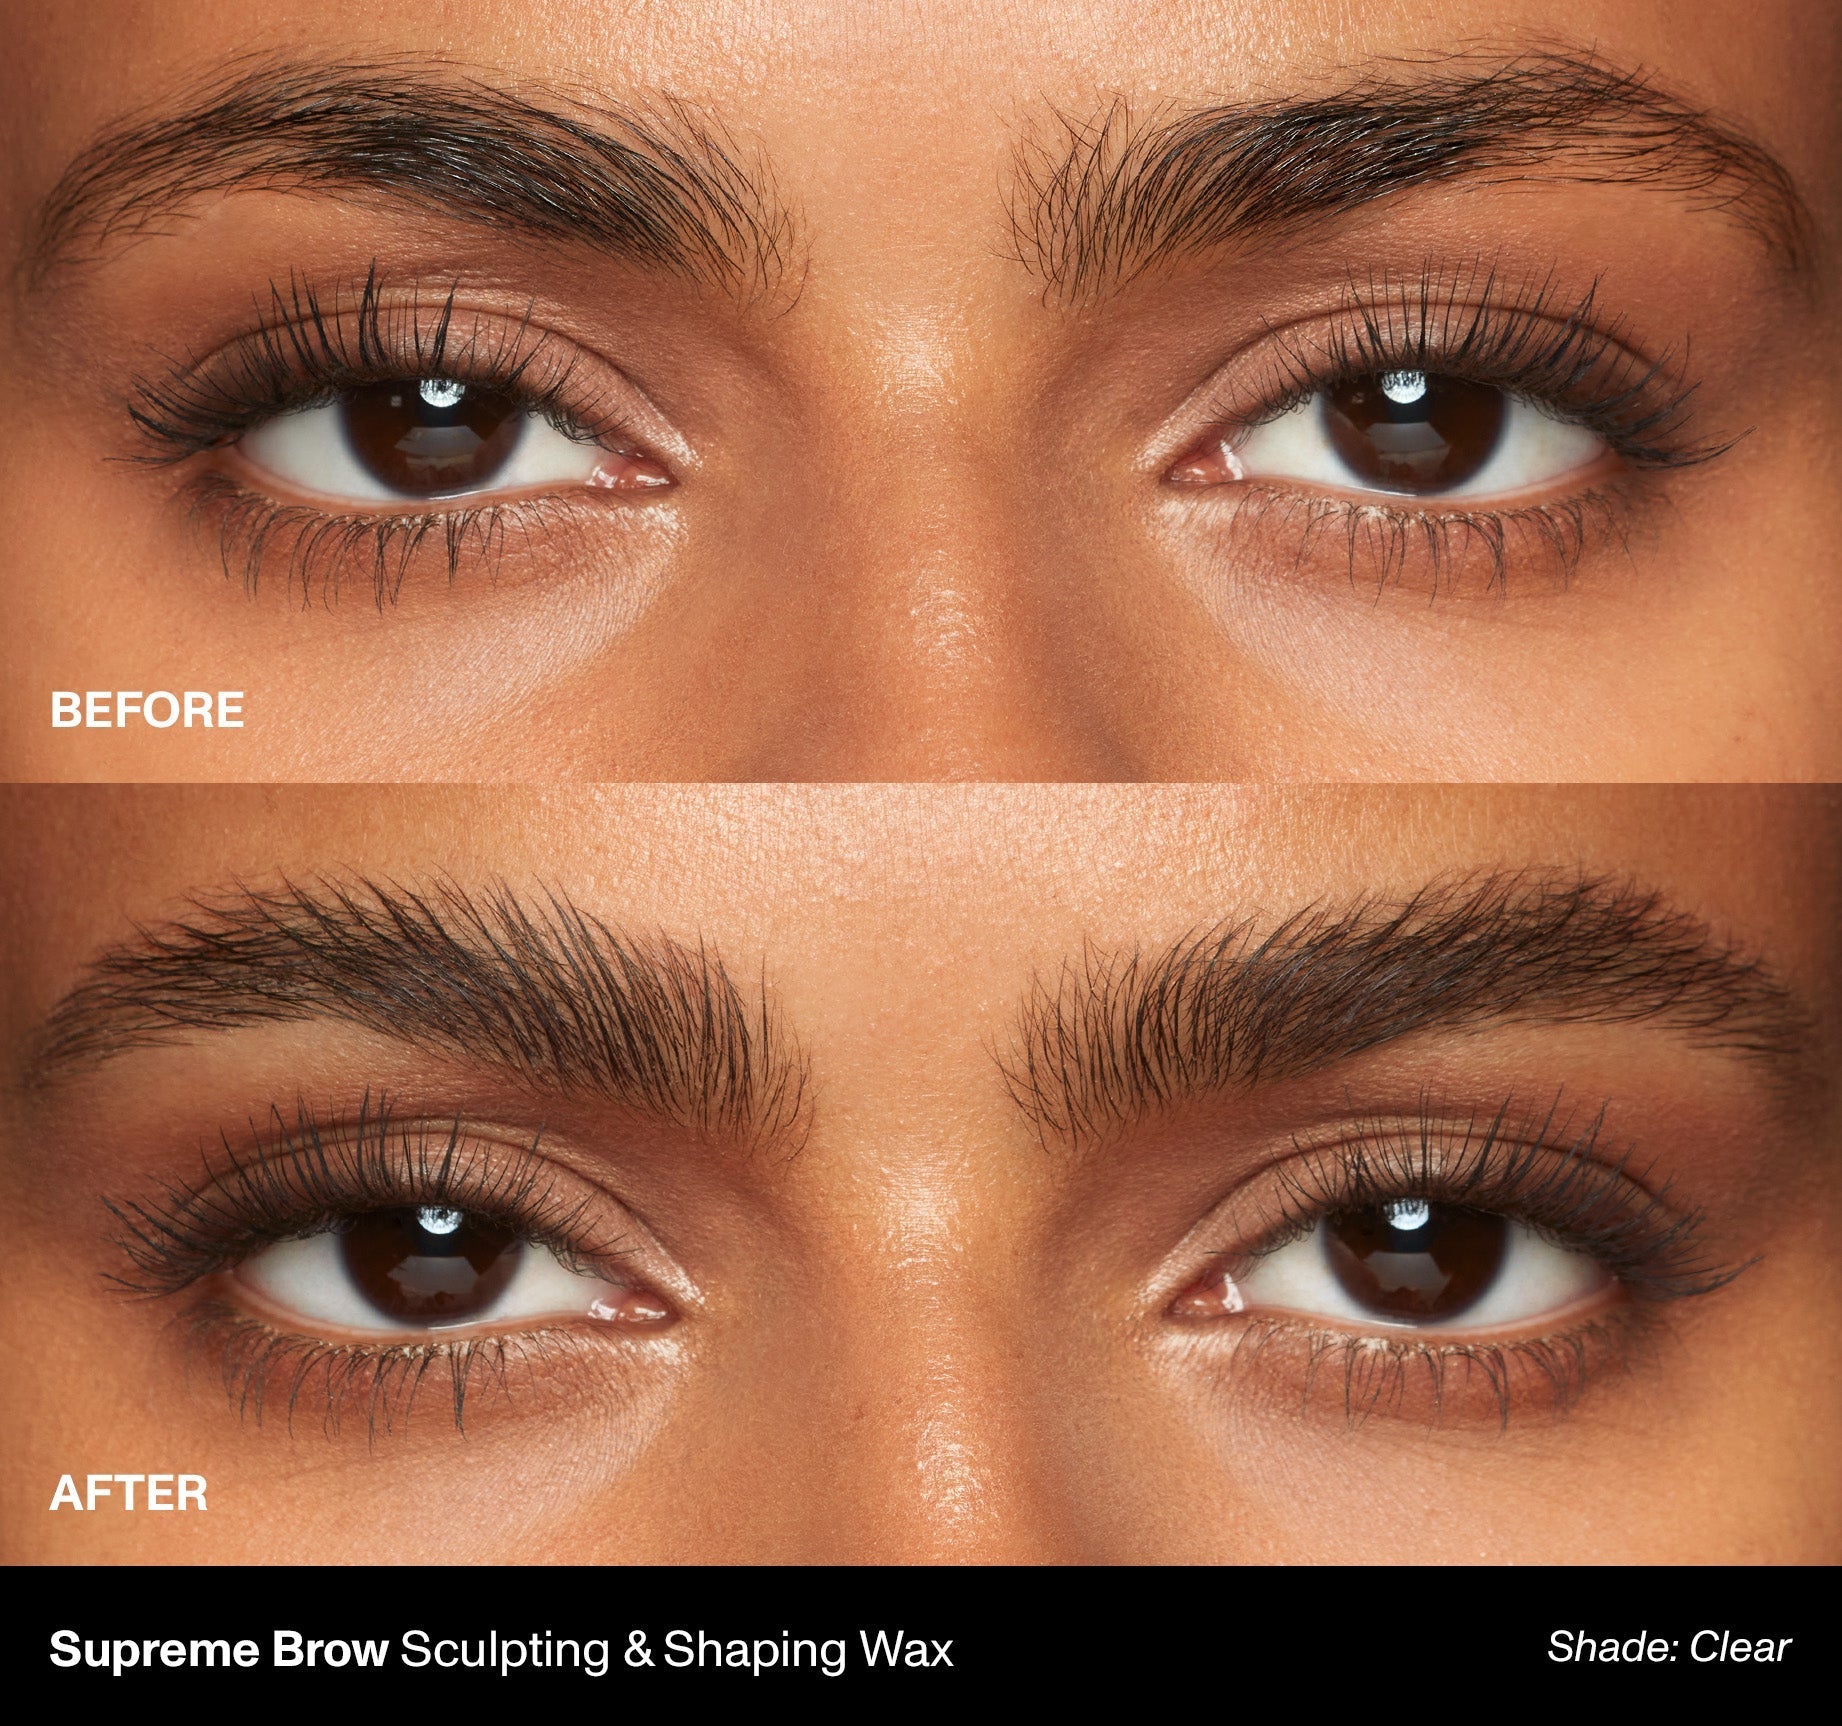 Supreme Brow Sculpting and Shaping Wax - Clear - Image 6